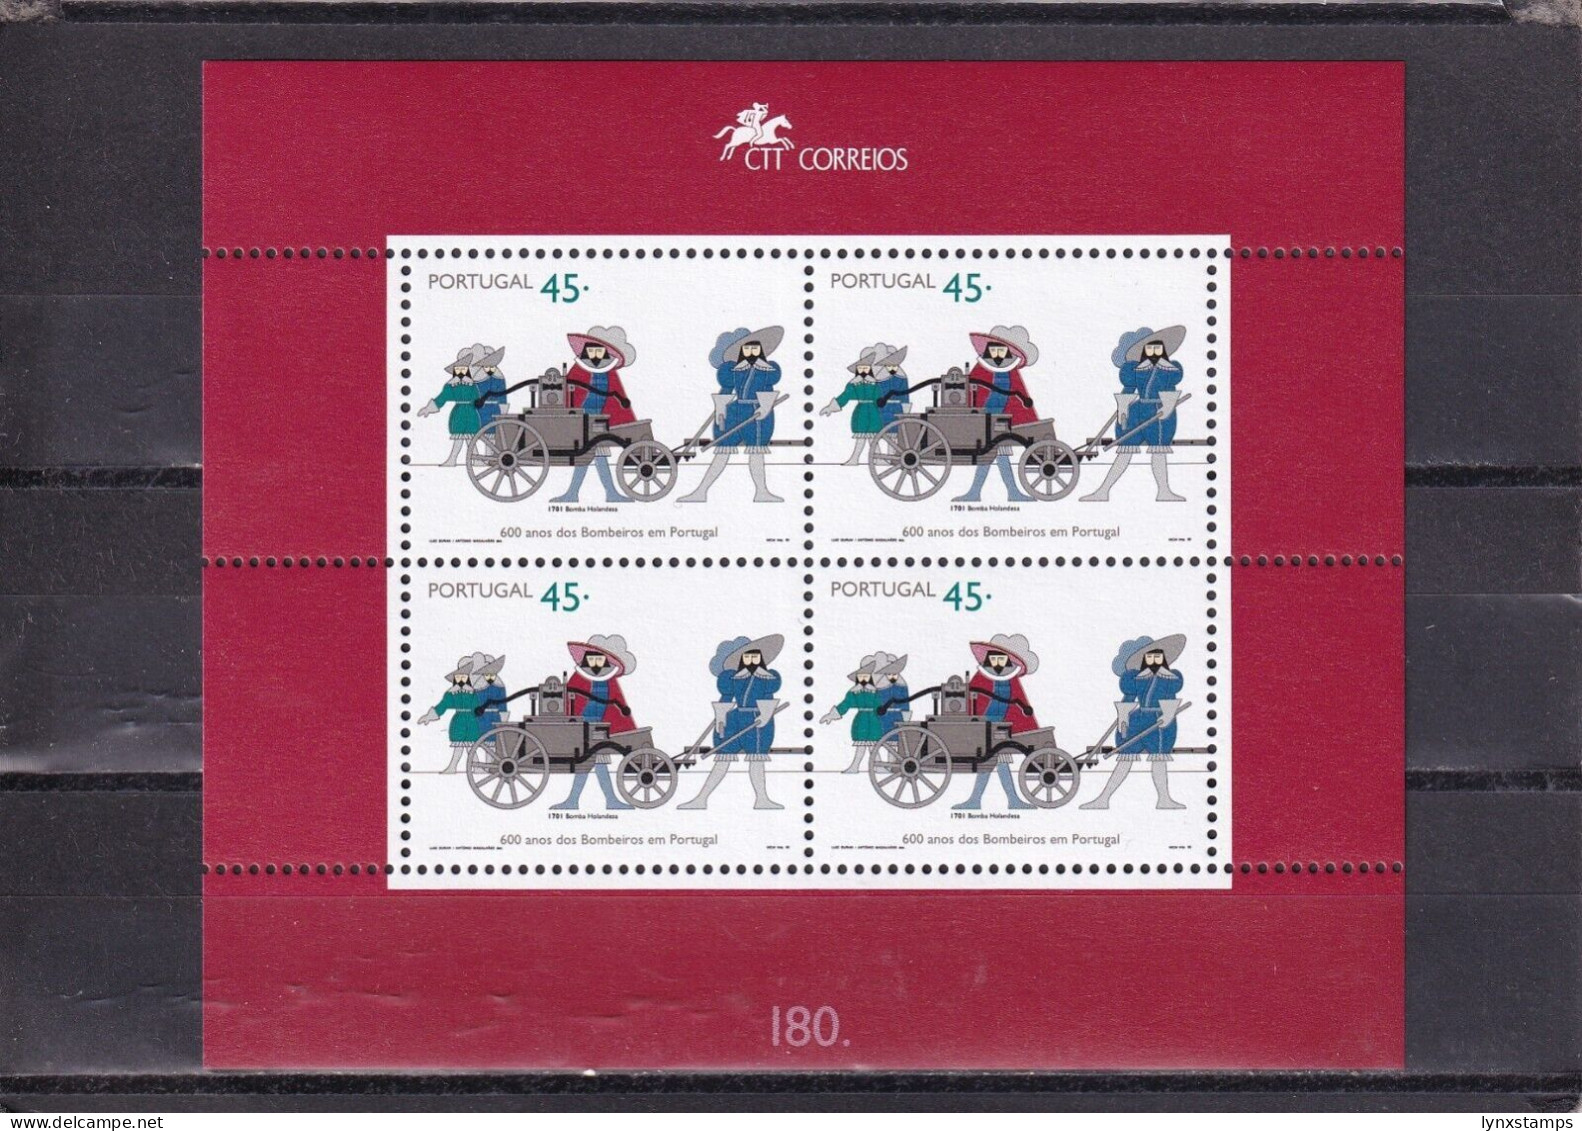 SA04 Portugal 1995 The 600th Anniversary Of The Fire Brigades In Portugal Block - Unused Stamps